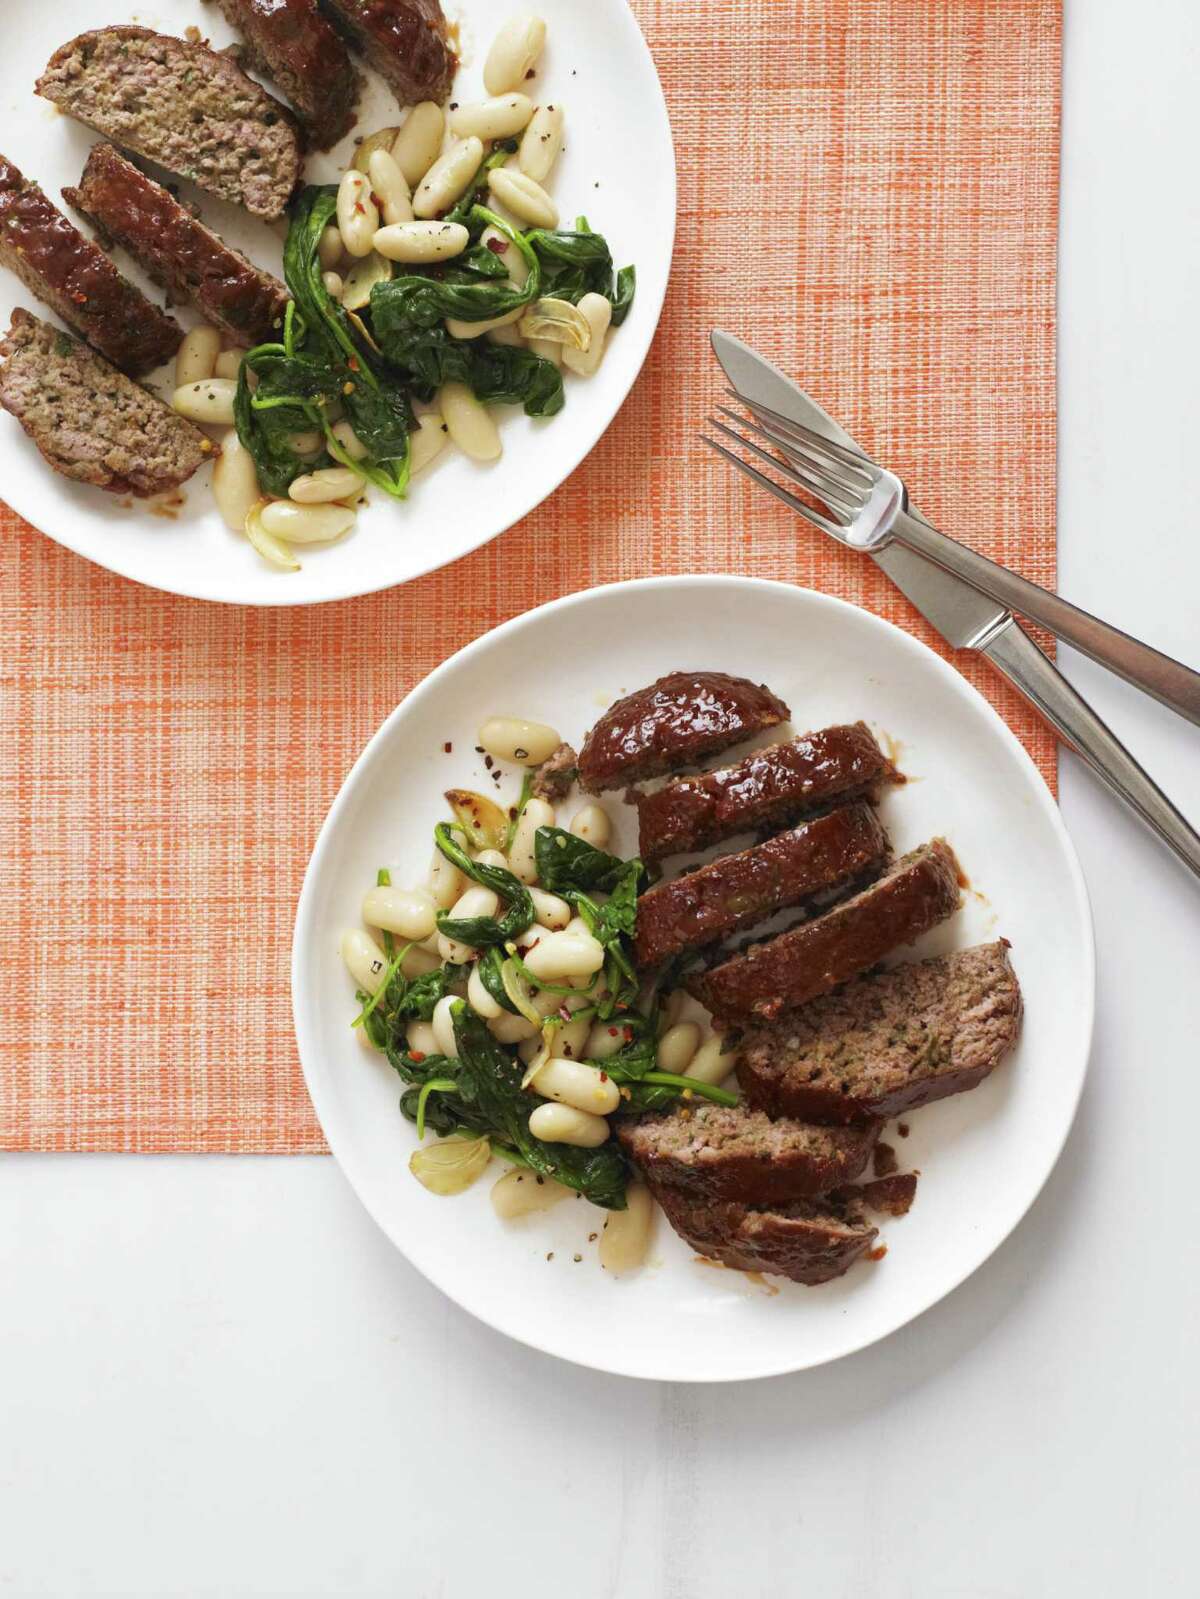 Recipe: Balsamic Meat Loaf With Garlicky Beans and Greens